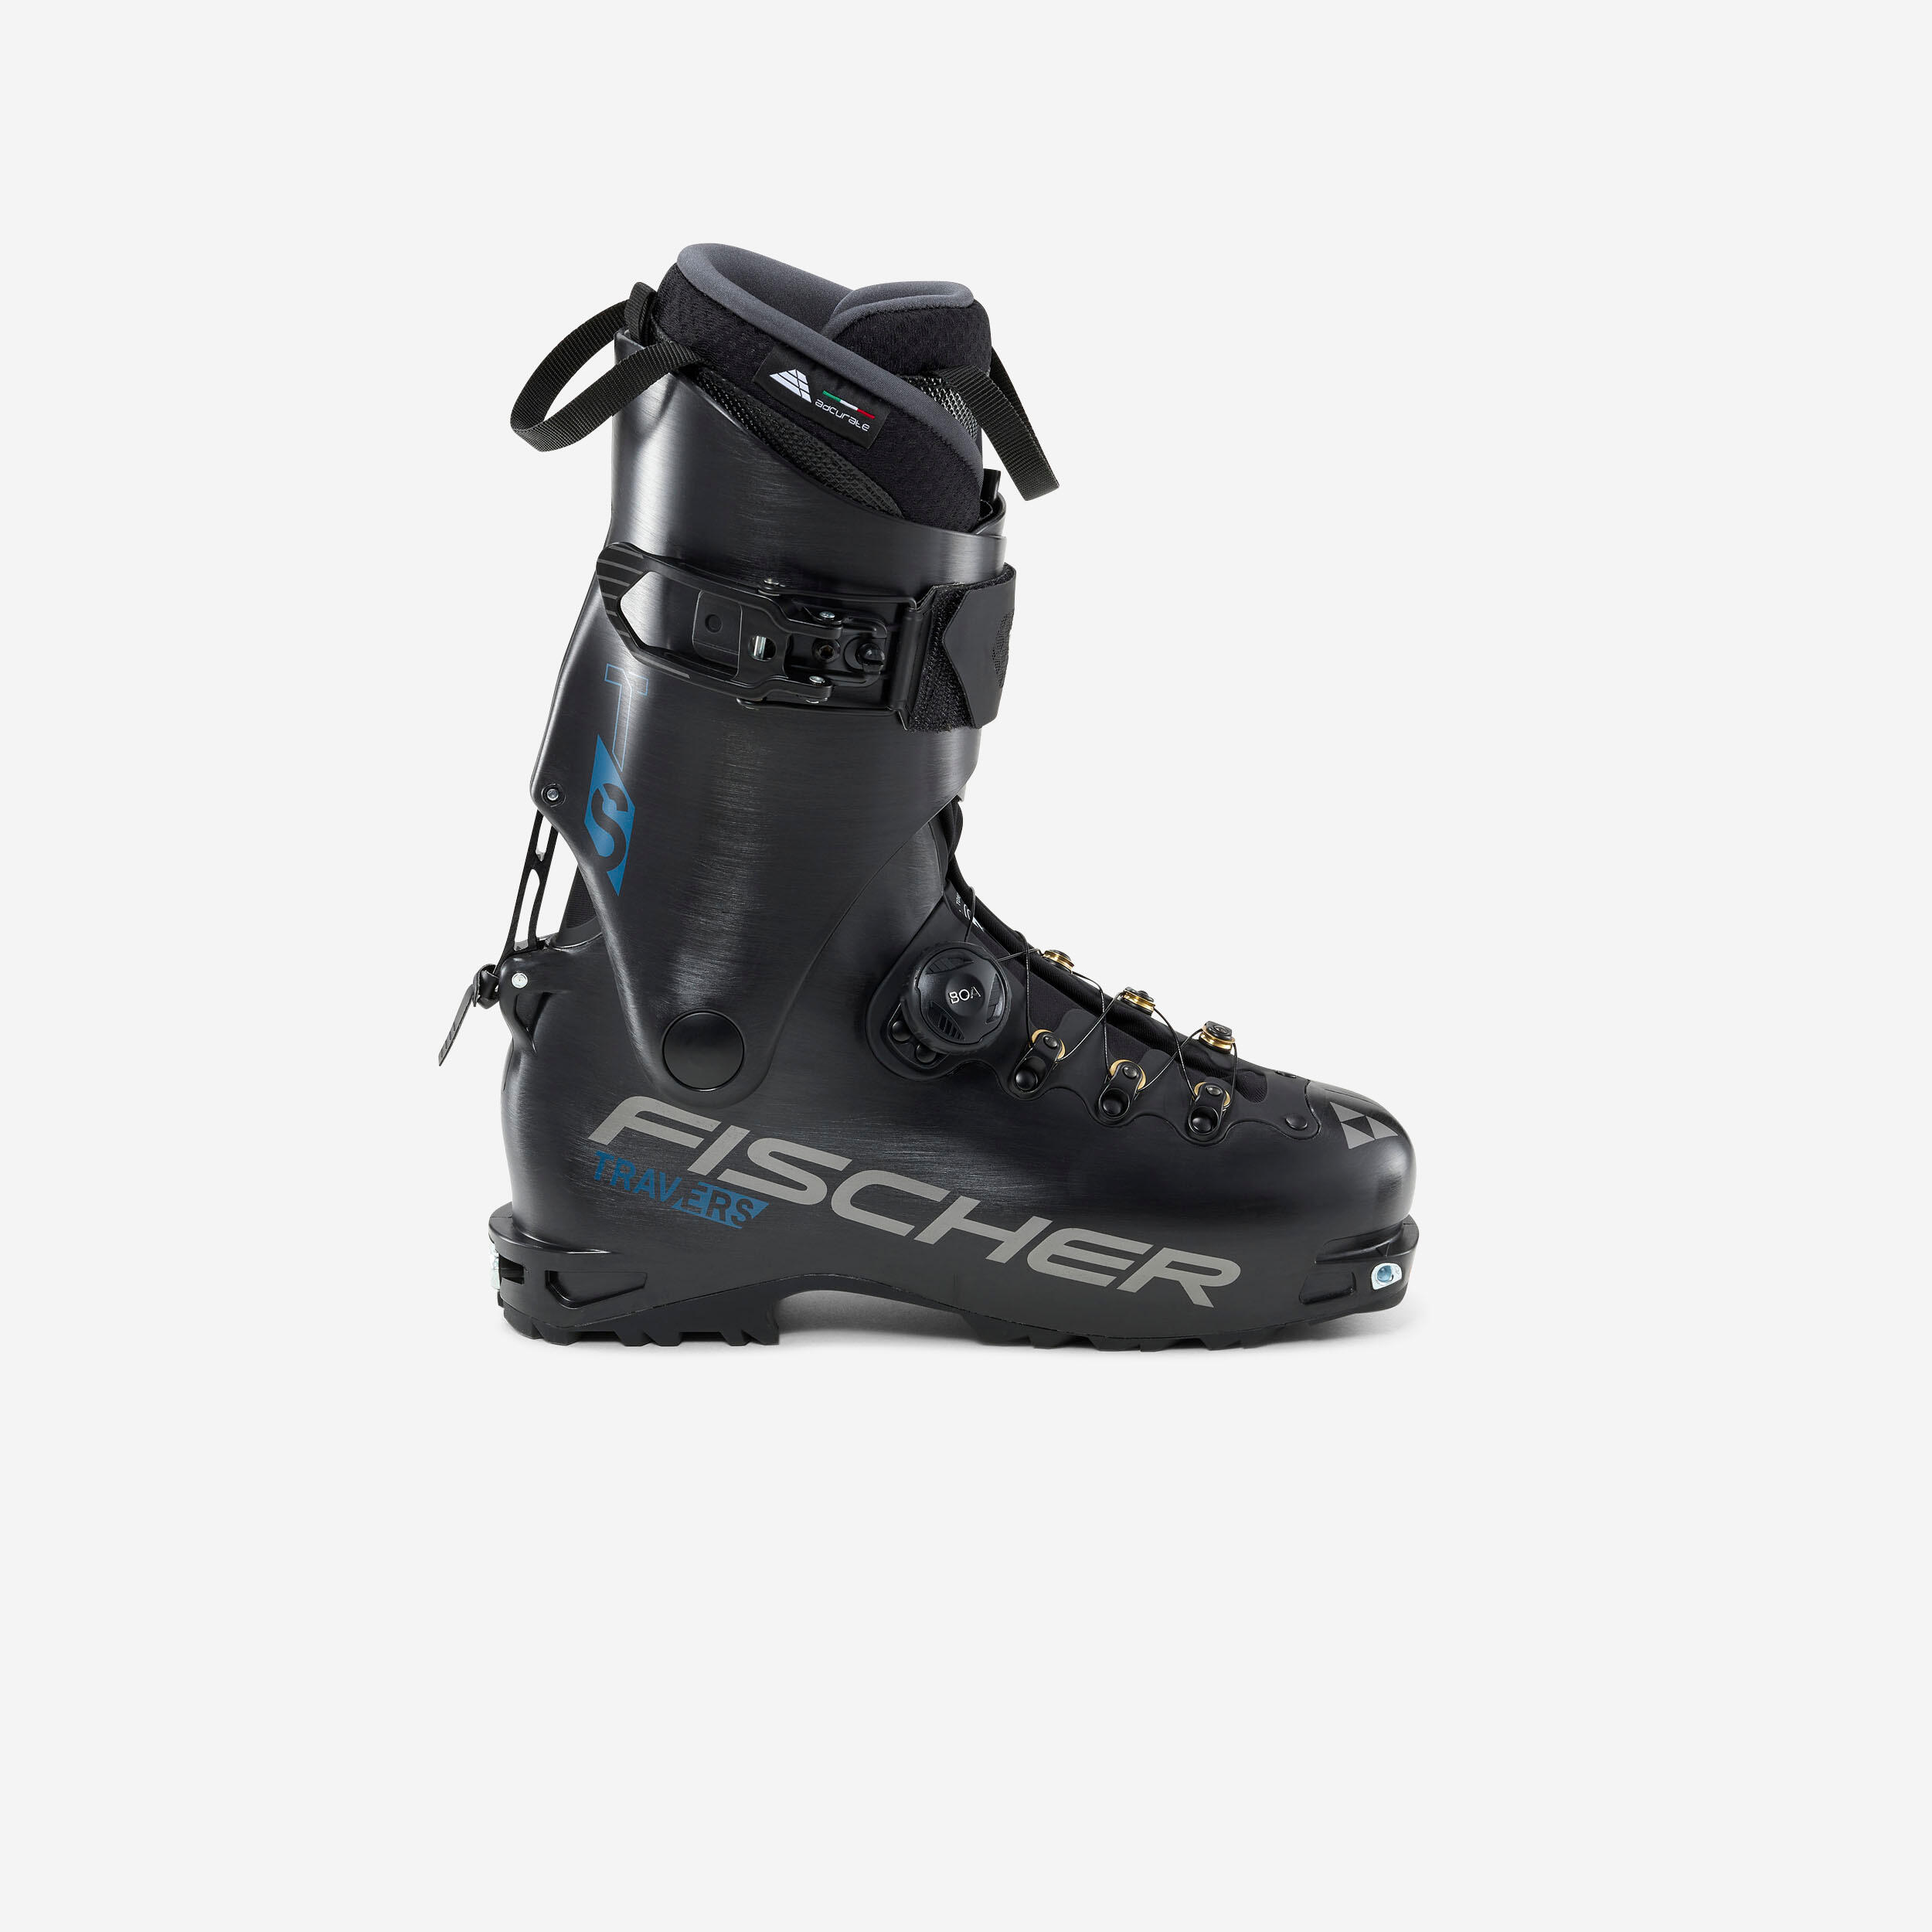 Fischer Adult Ski Touring Boots - Travers Ts